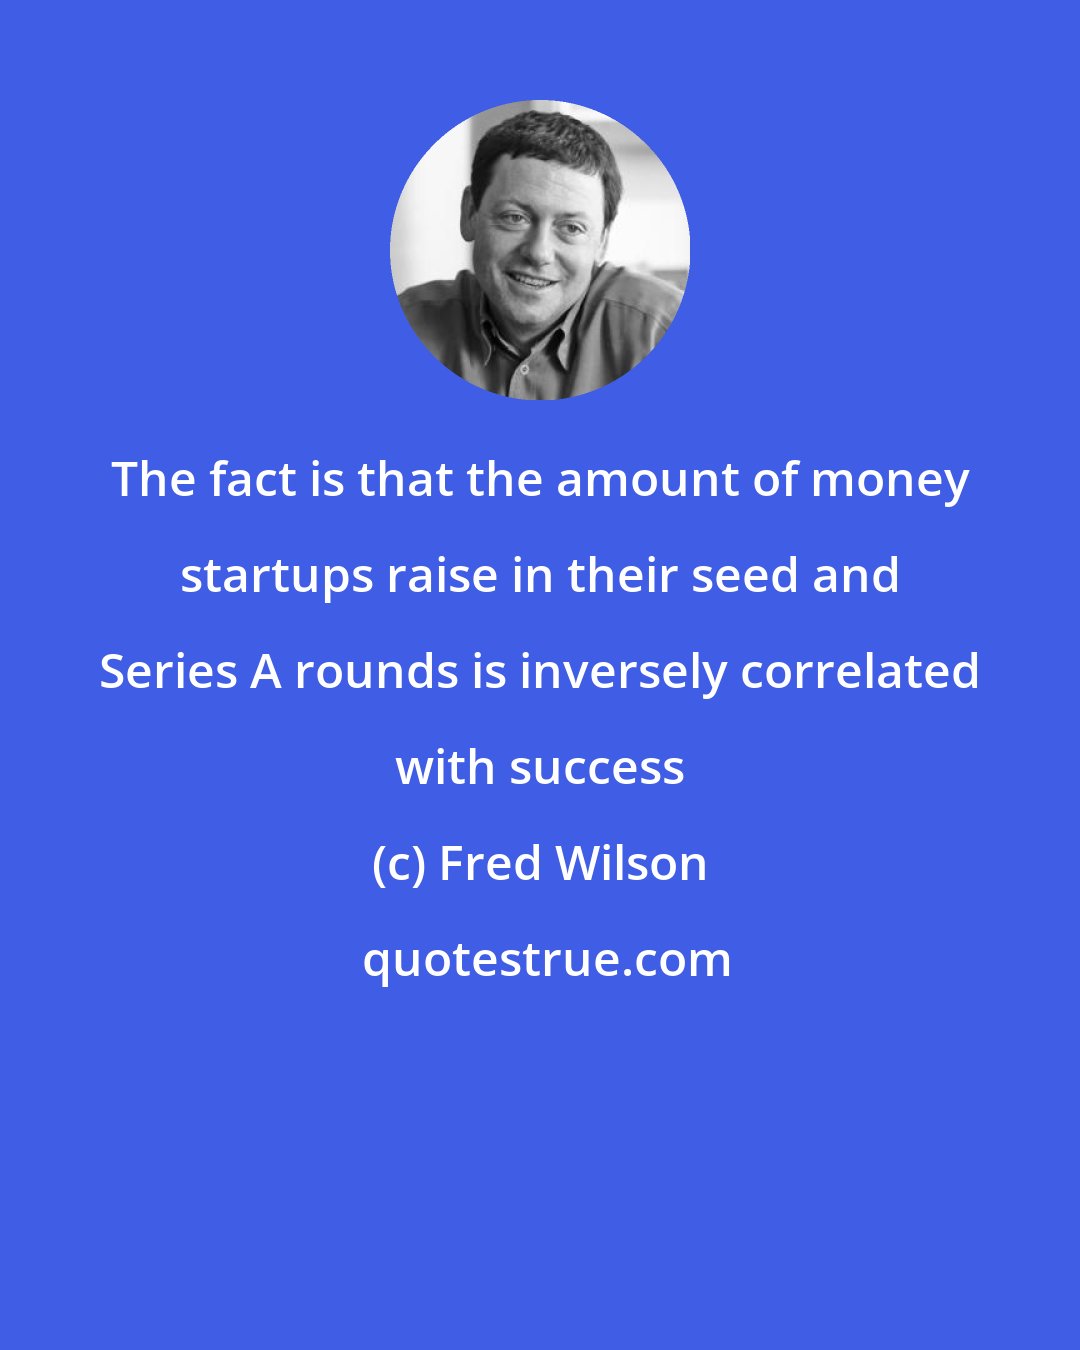 Fred Wilson: The fact is that the amount of money startups raise in their seed and Series A rounds is inversely correlated with success